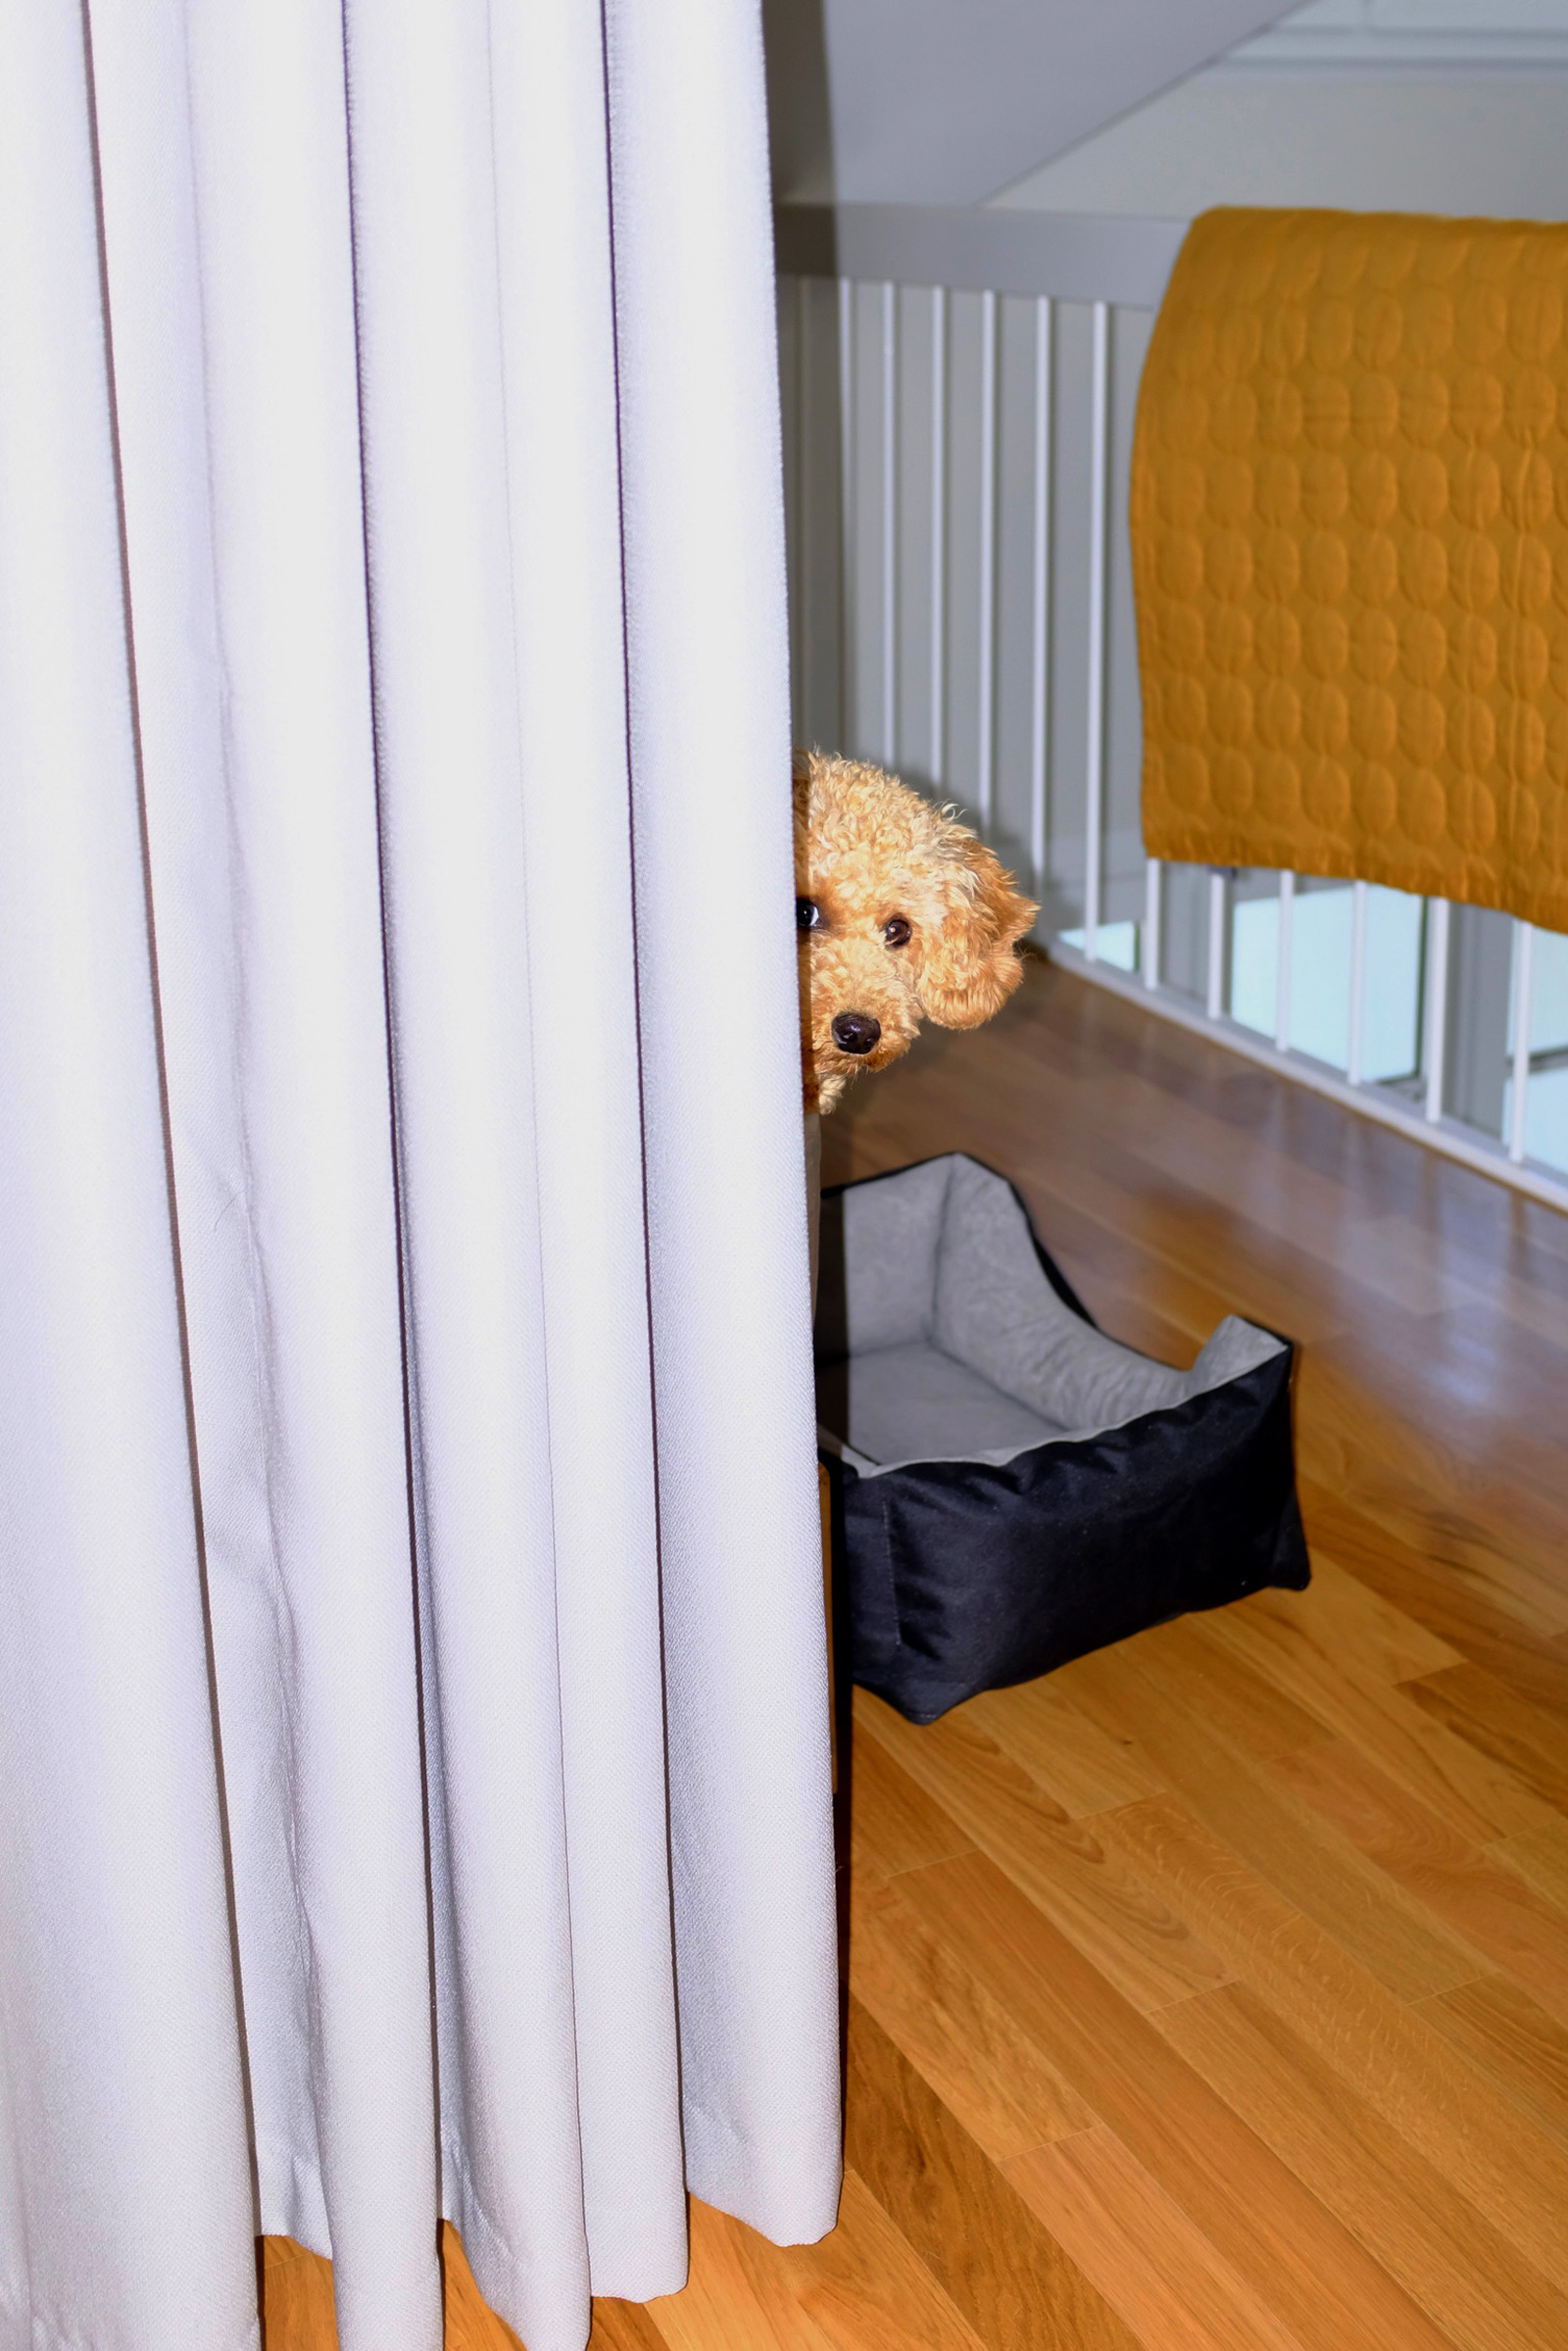 Gisela, the small golden poodle, looking to the camera from behind a curtain